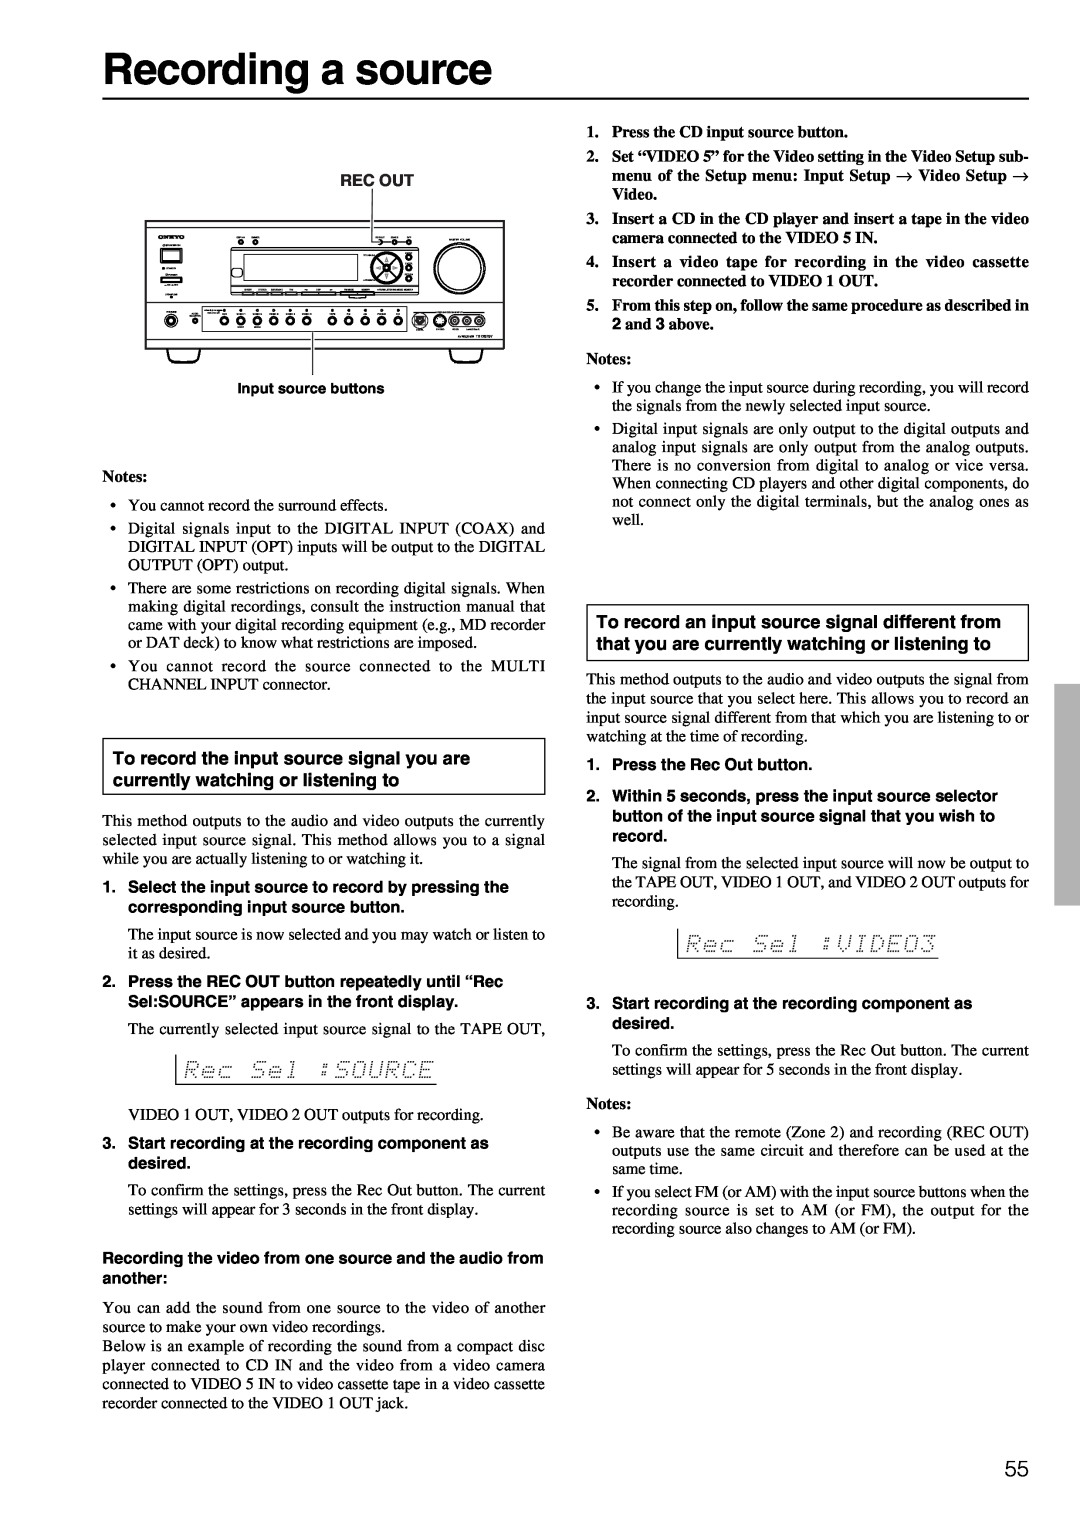 Onkyo TX-DS797 instruction manual Recording a source, Notes, Press the CD input source button, Video 